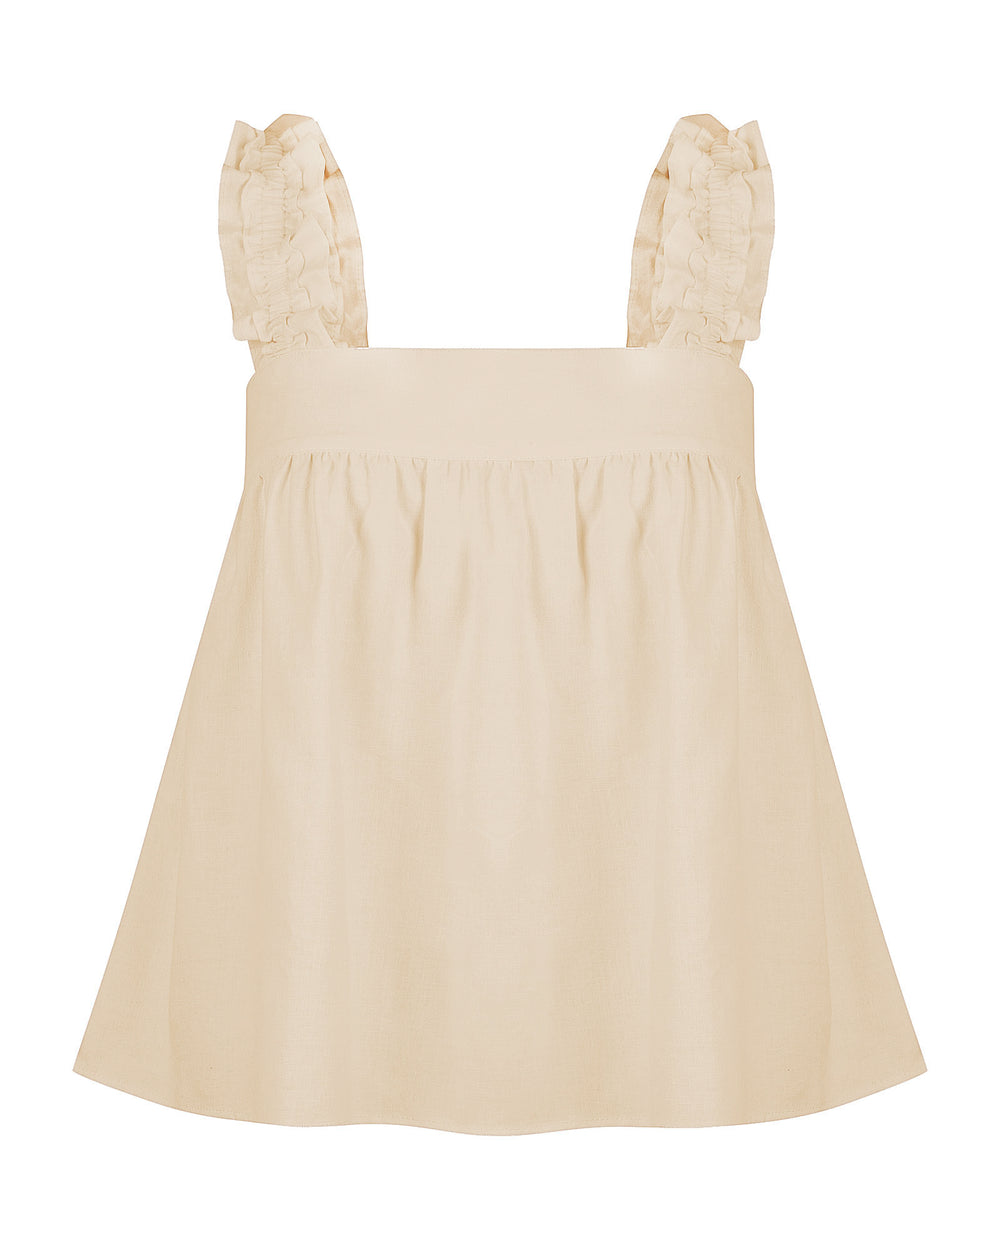 The Baby Doll Top